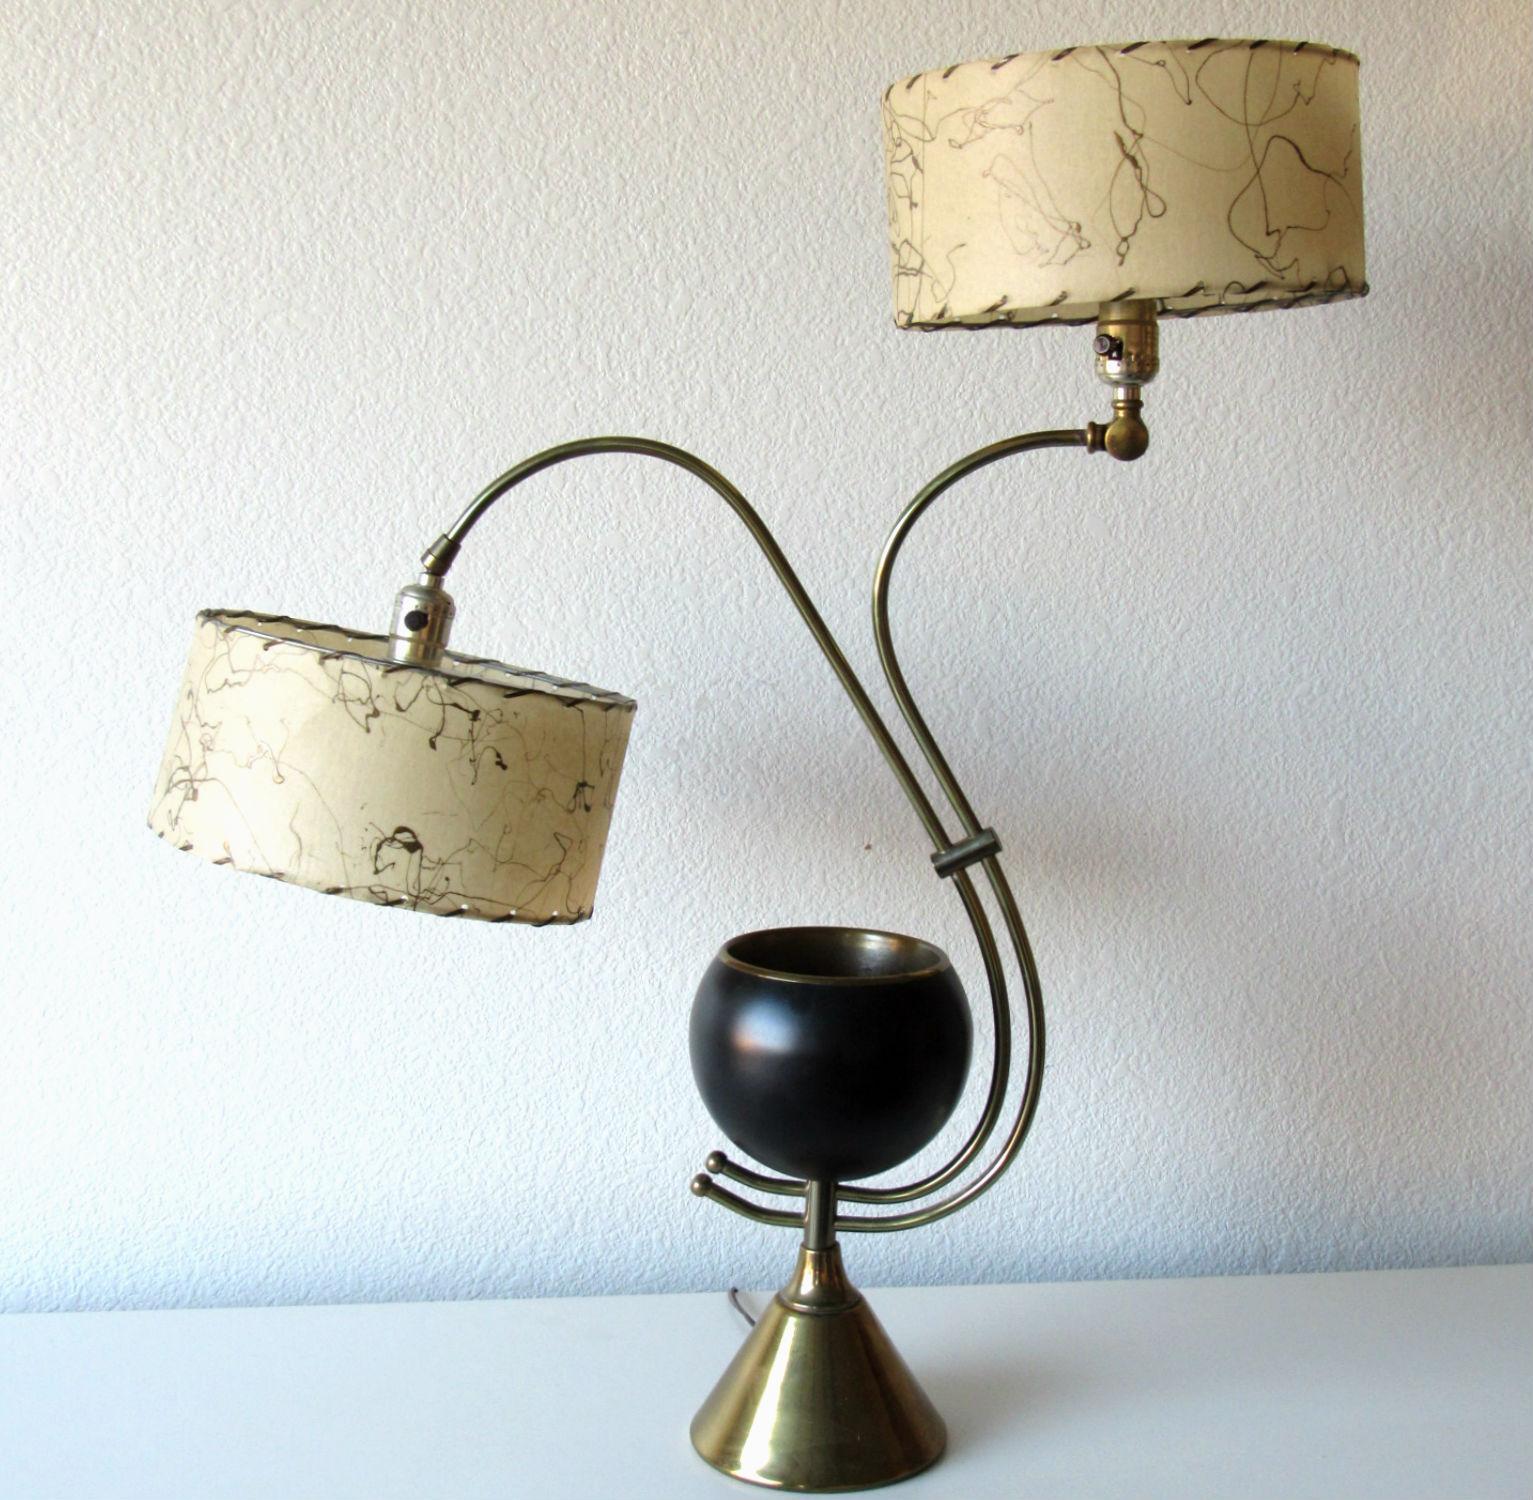 American Atomic Age Adjustable Mid-Century Modern Majestic Lamp 1950s For Sale